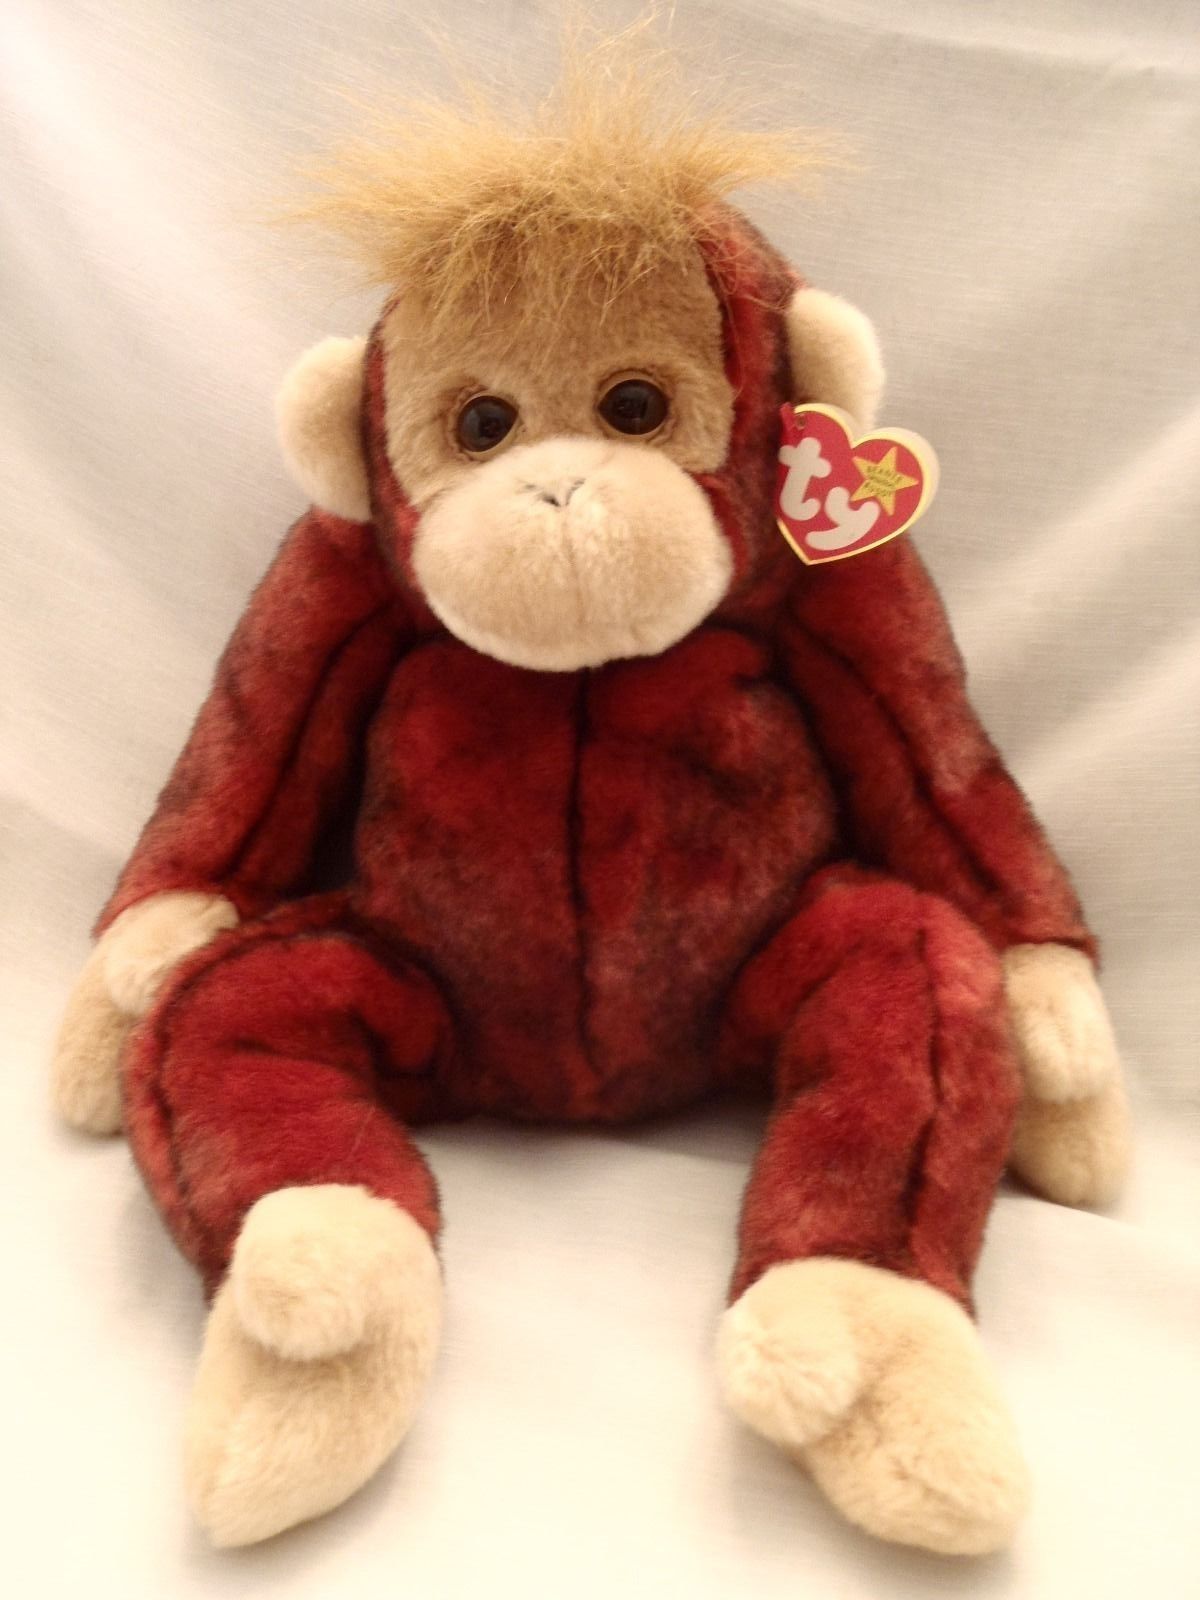 beanie babies that are worth money 2018